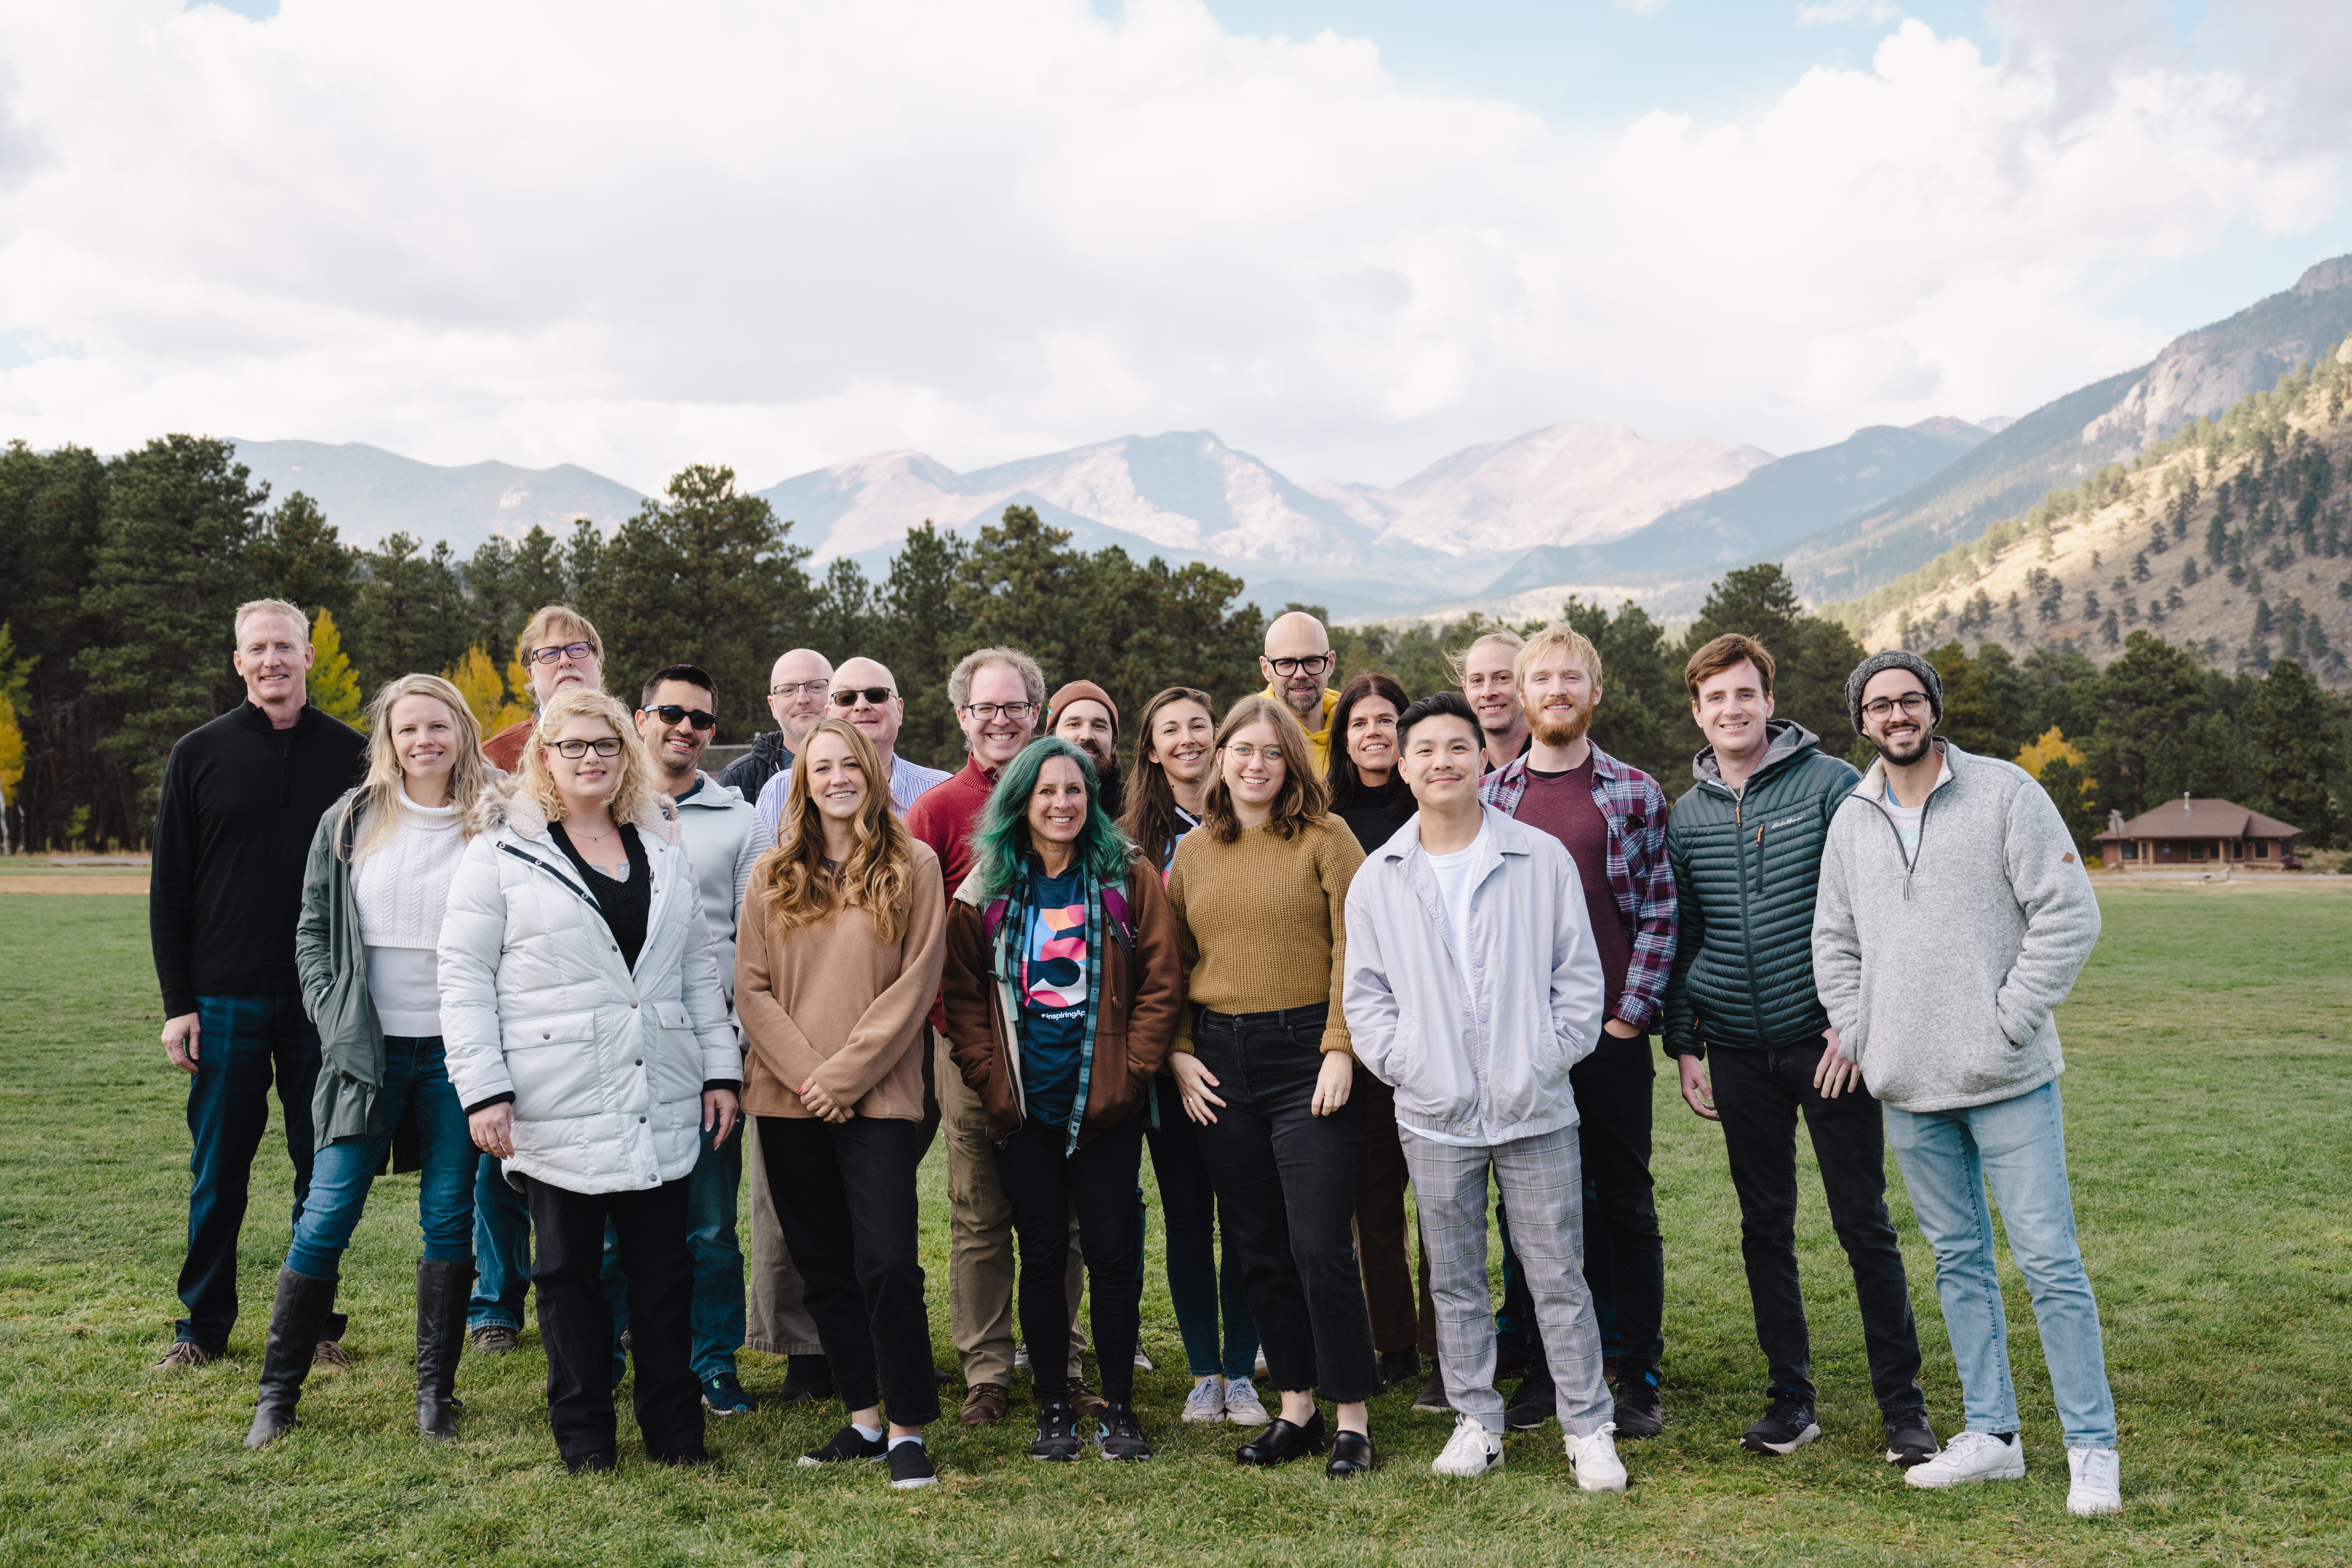  The InspiringApp team gathered in front of a mountain range on green grass.